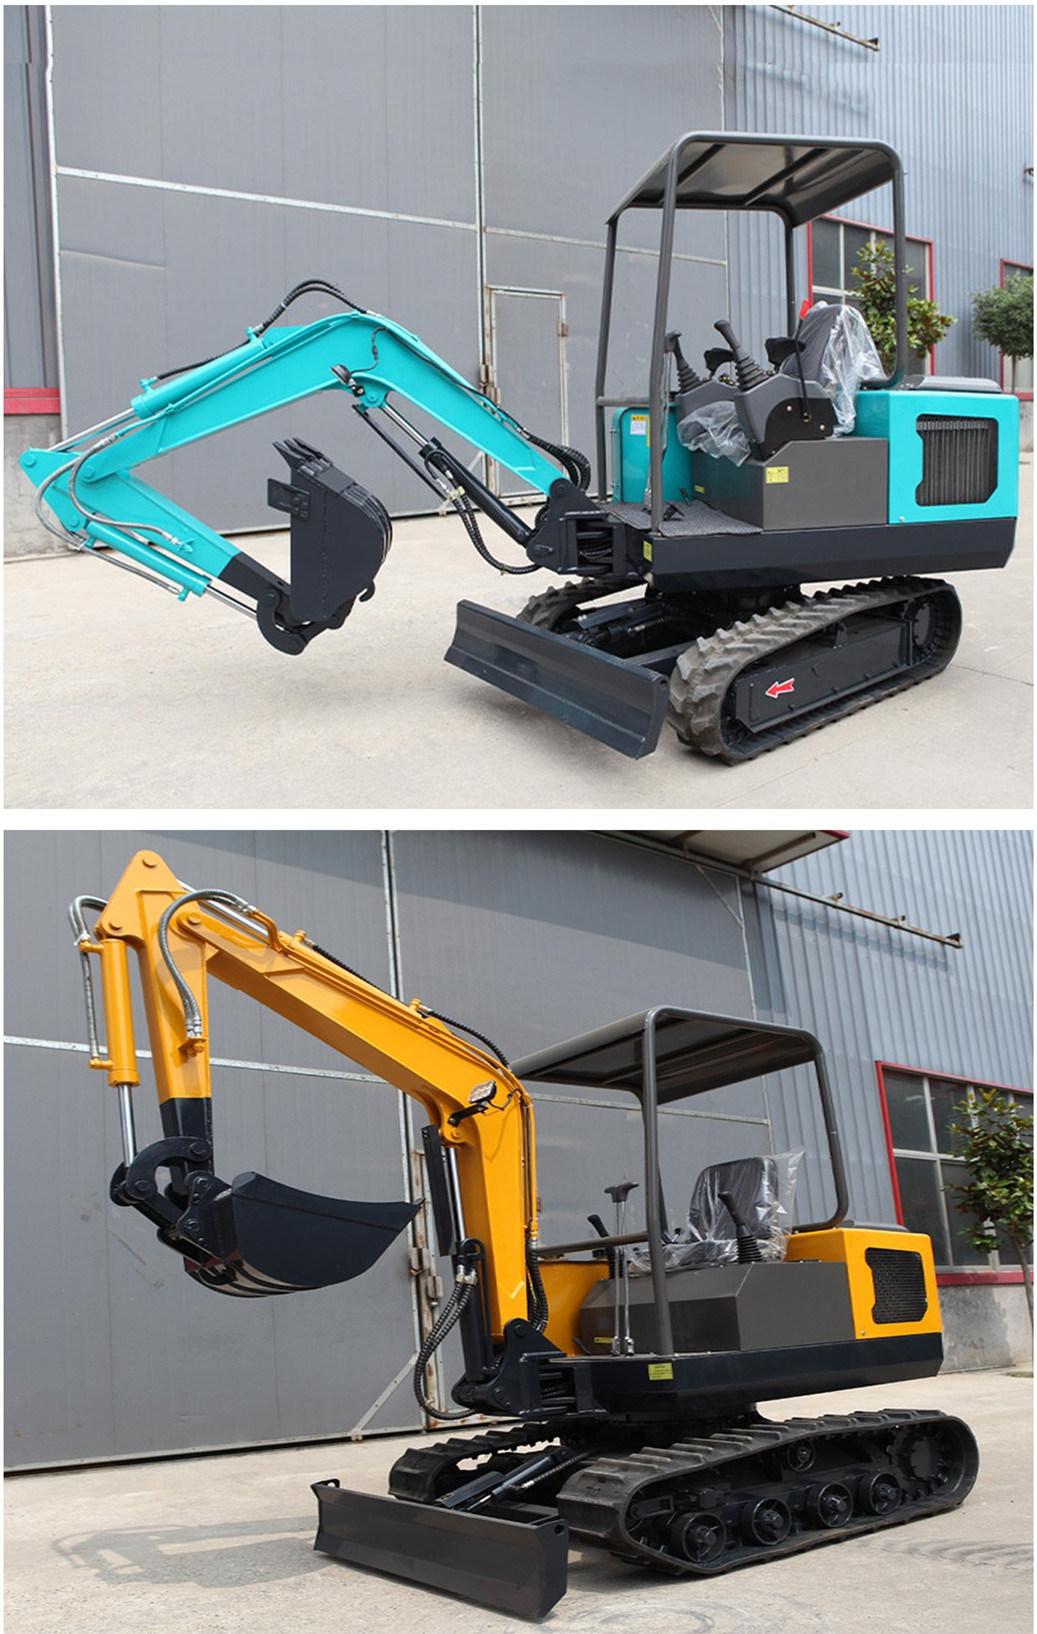 1.8 Tons Durable Small Bucket Backhoe Excavators with Track Chain